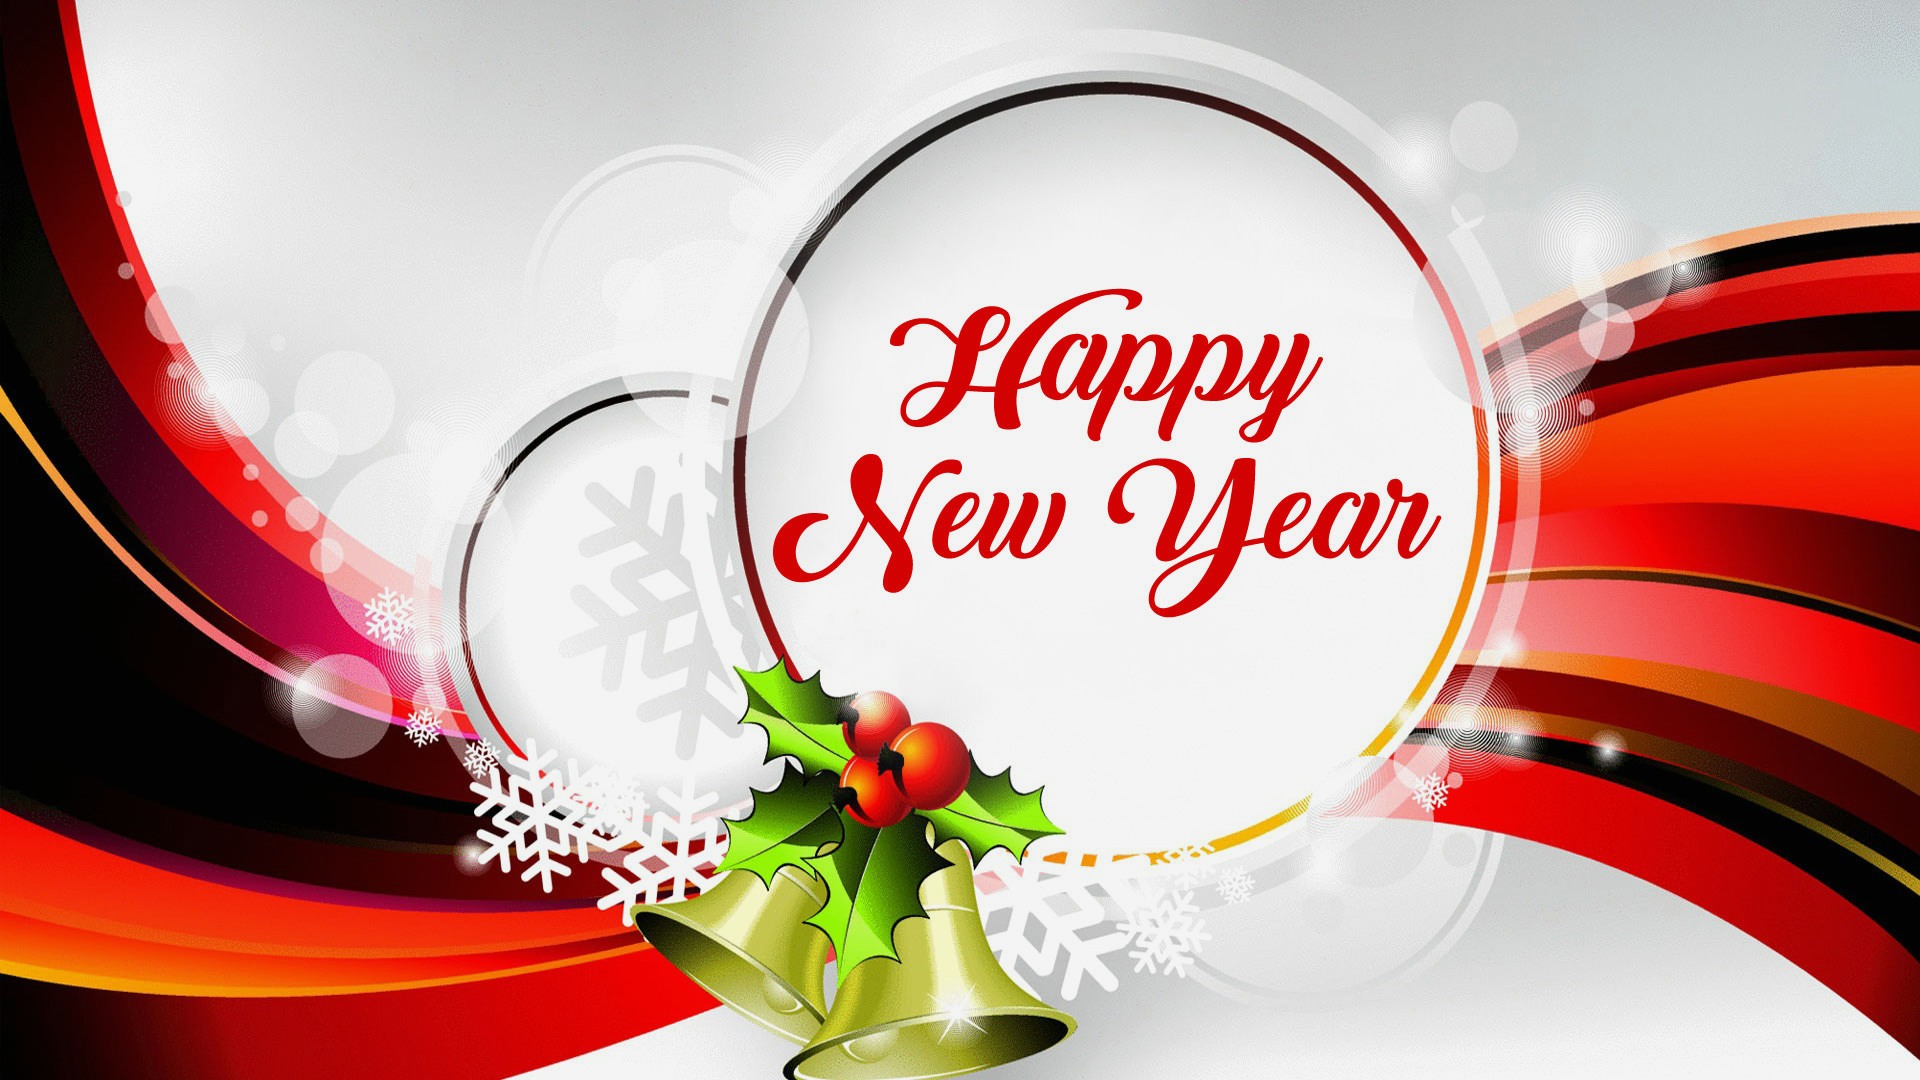 Special Happy New Year 2018 Wallpaper Hd Greetings - New Year Background Designs - HD Wallpaper 